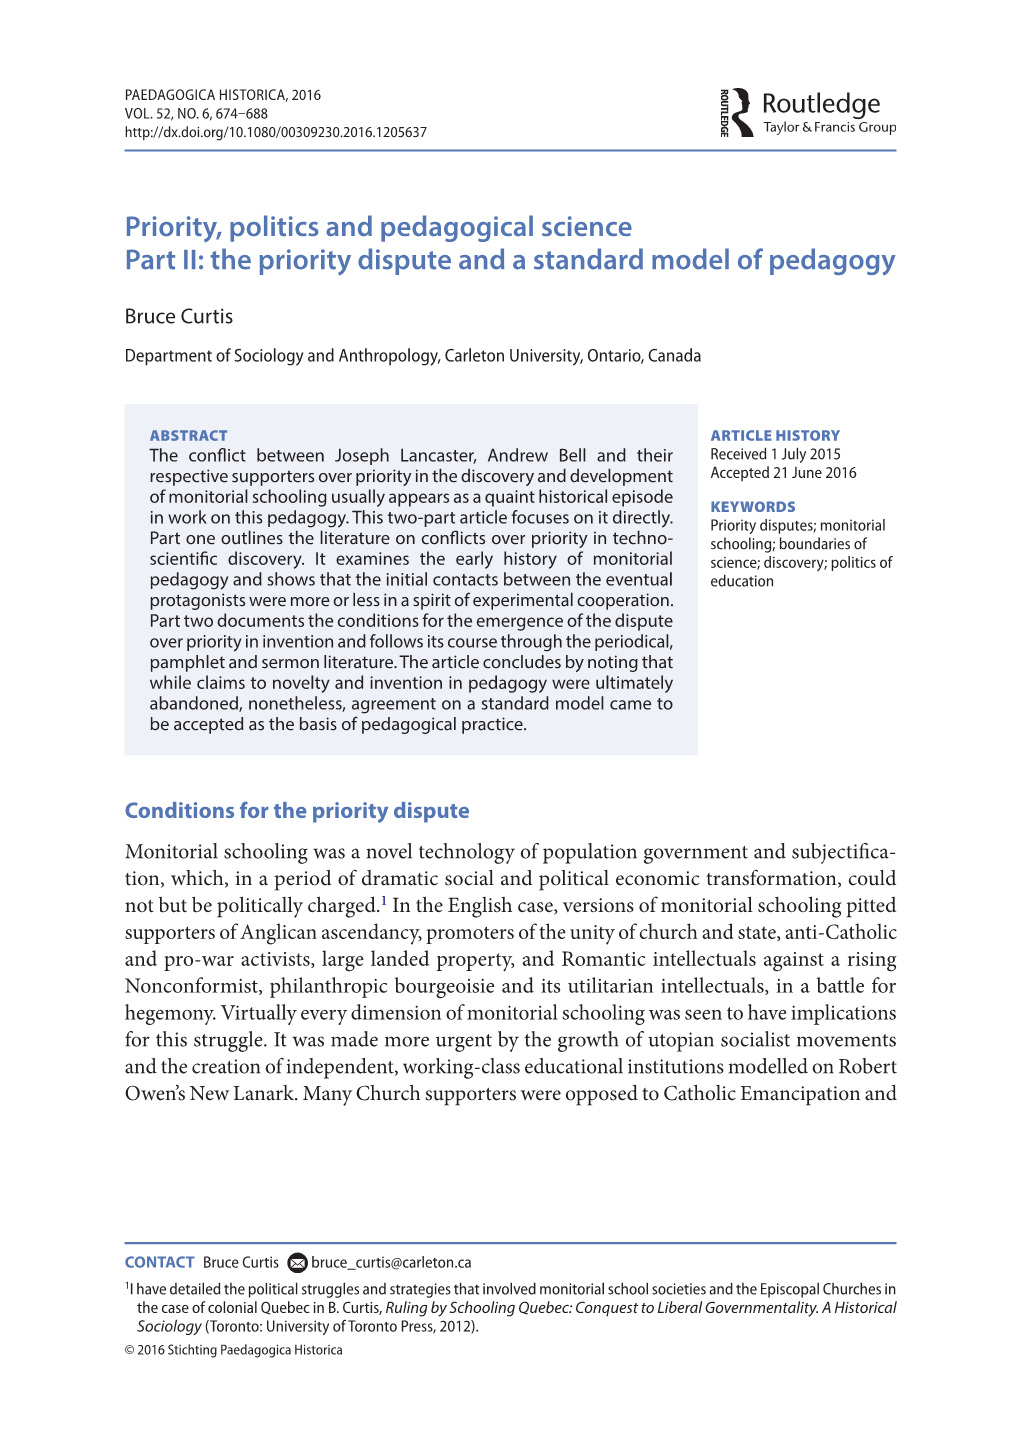 Priority, Politics and Pedagogical Science. Part II